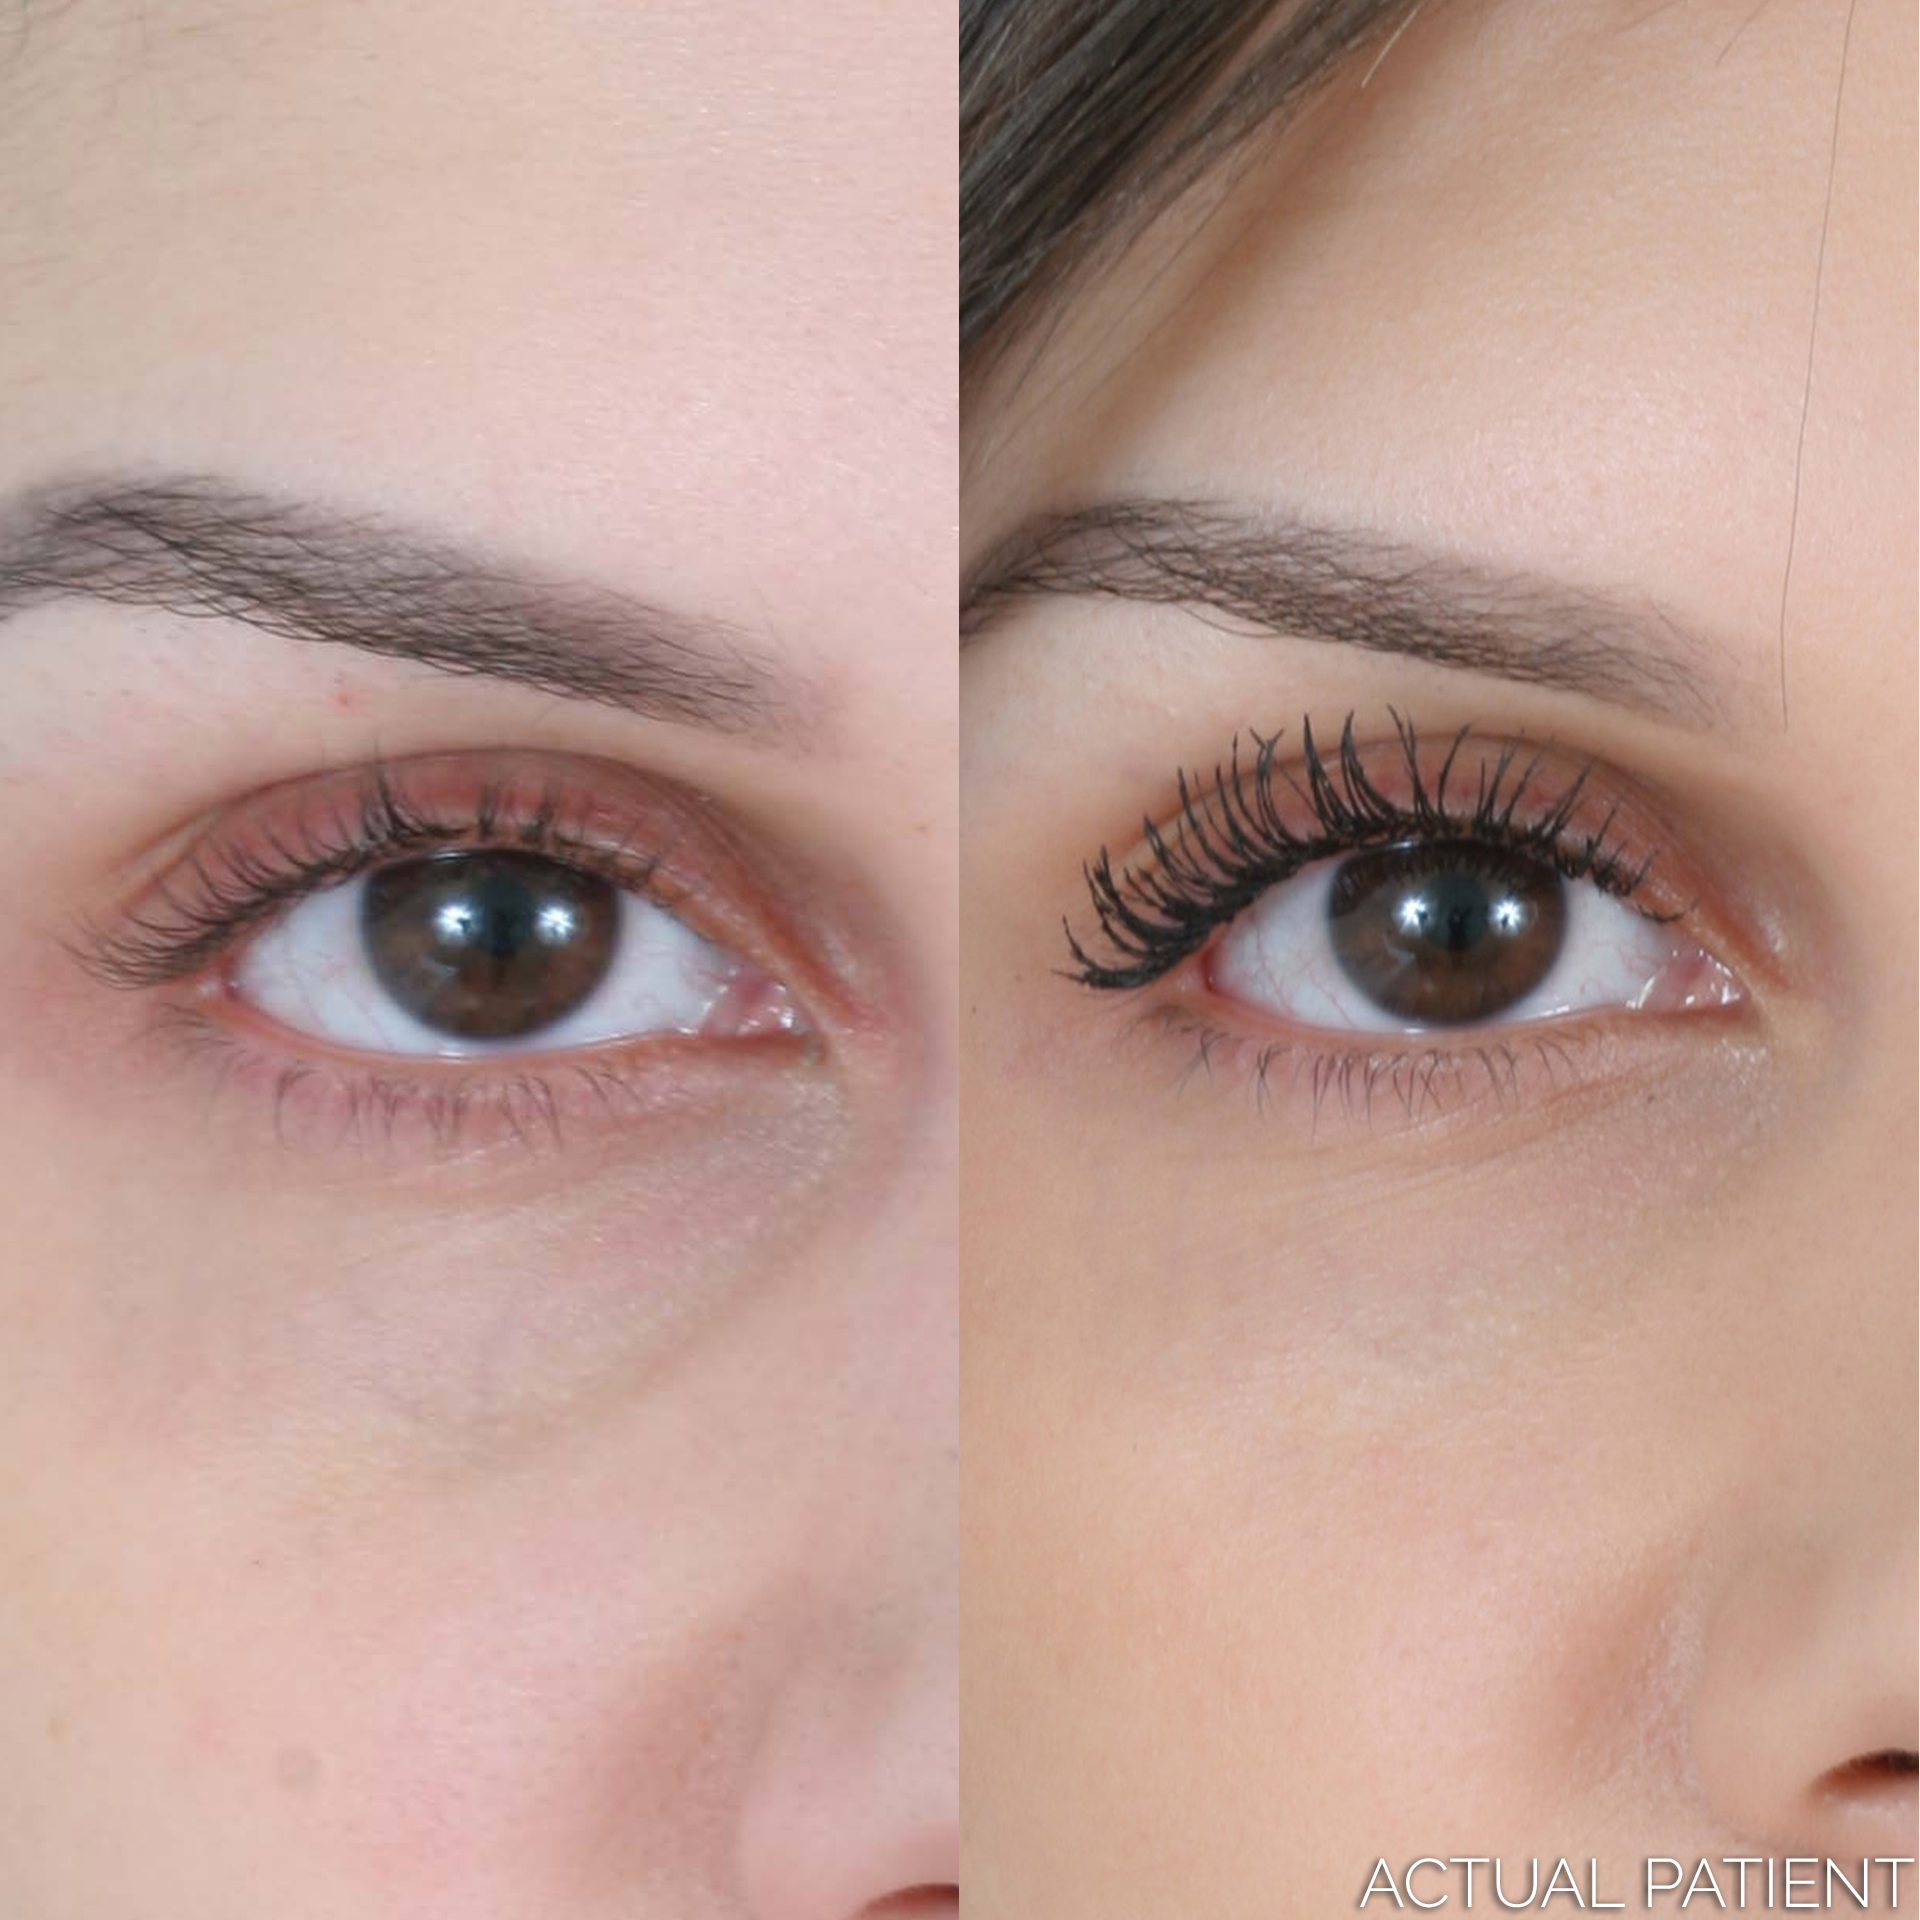 Aesthetic Skin North Shore IL Facial Fillers - Under Eye Filler